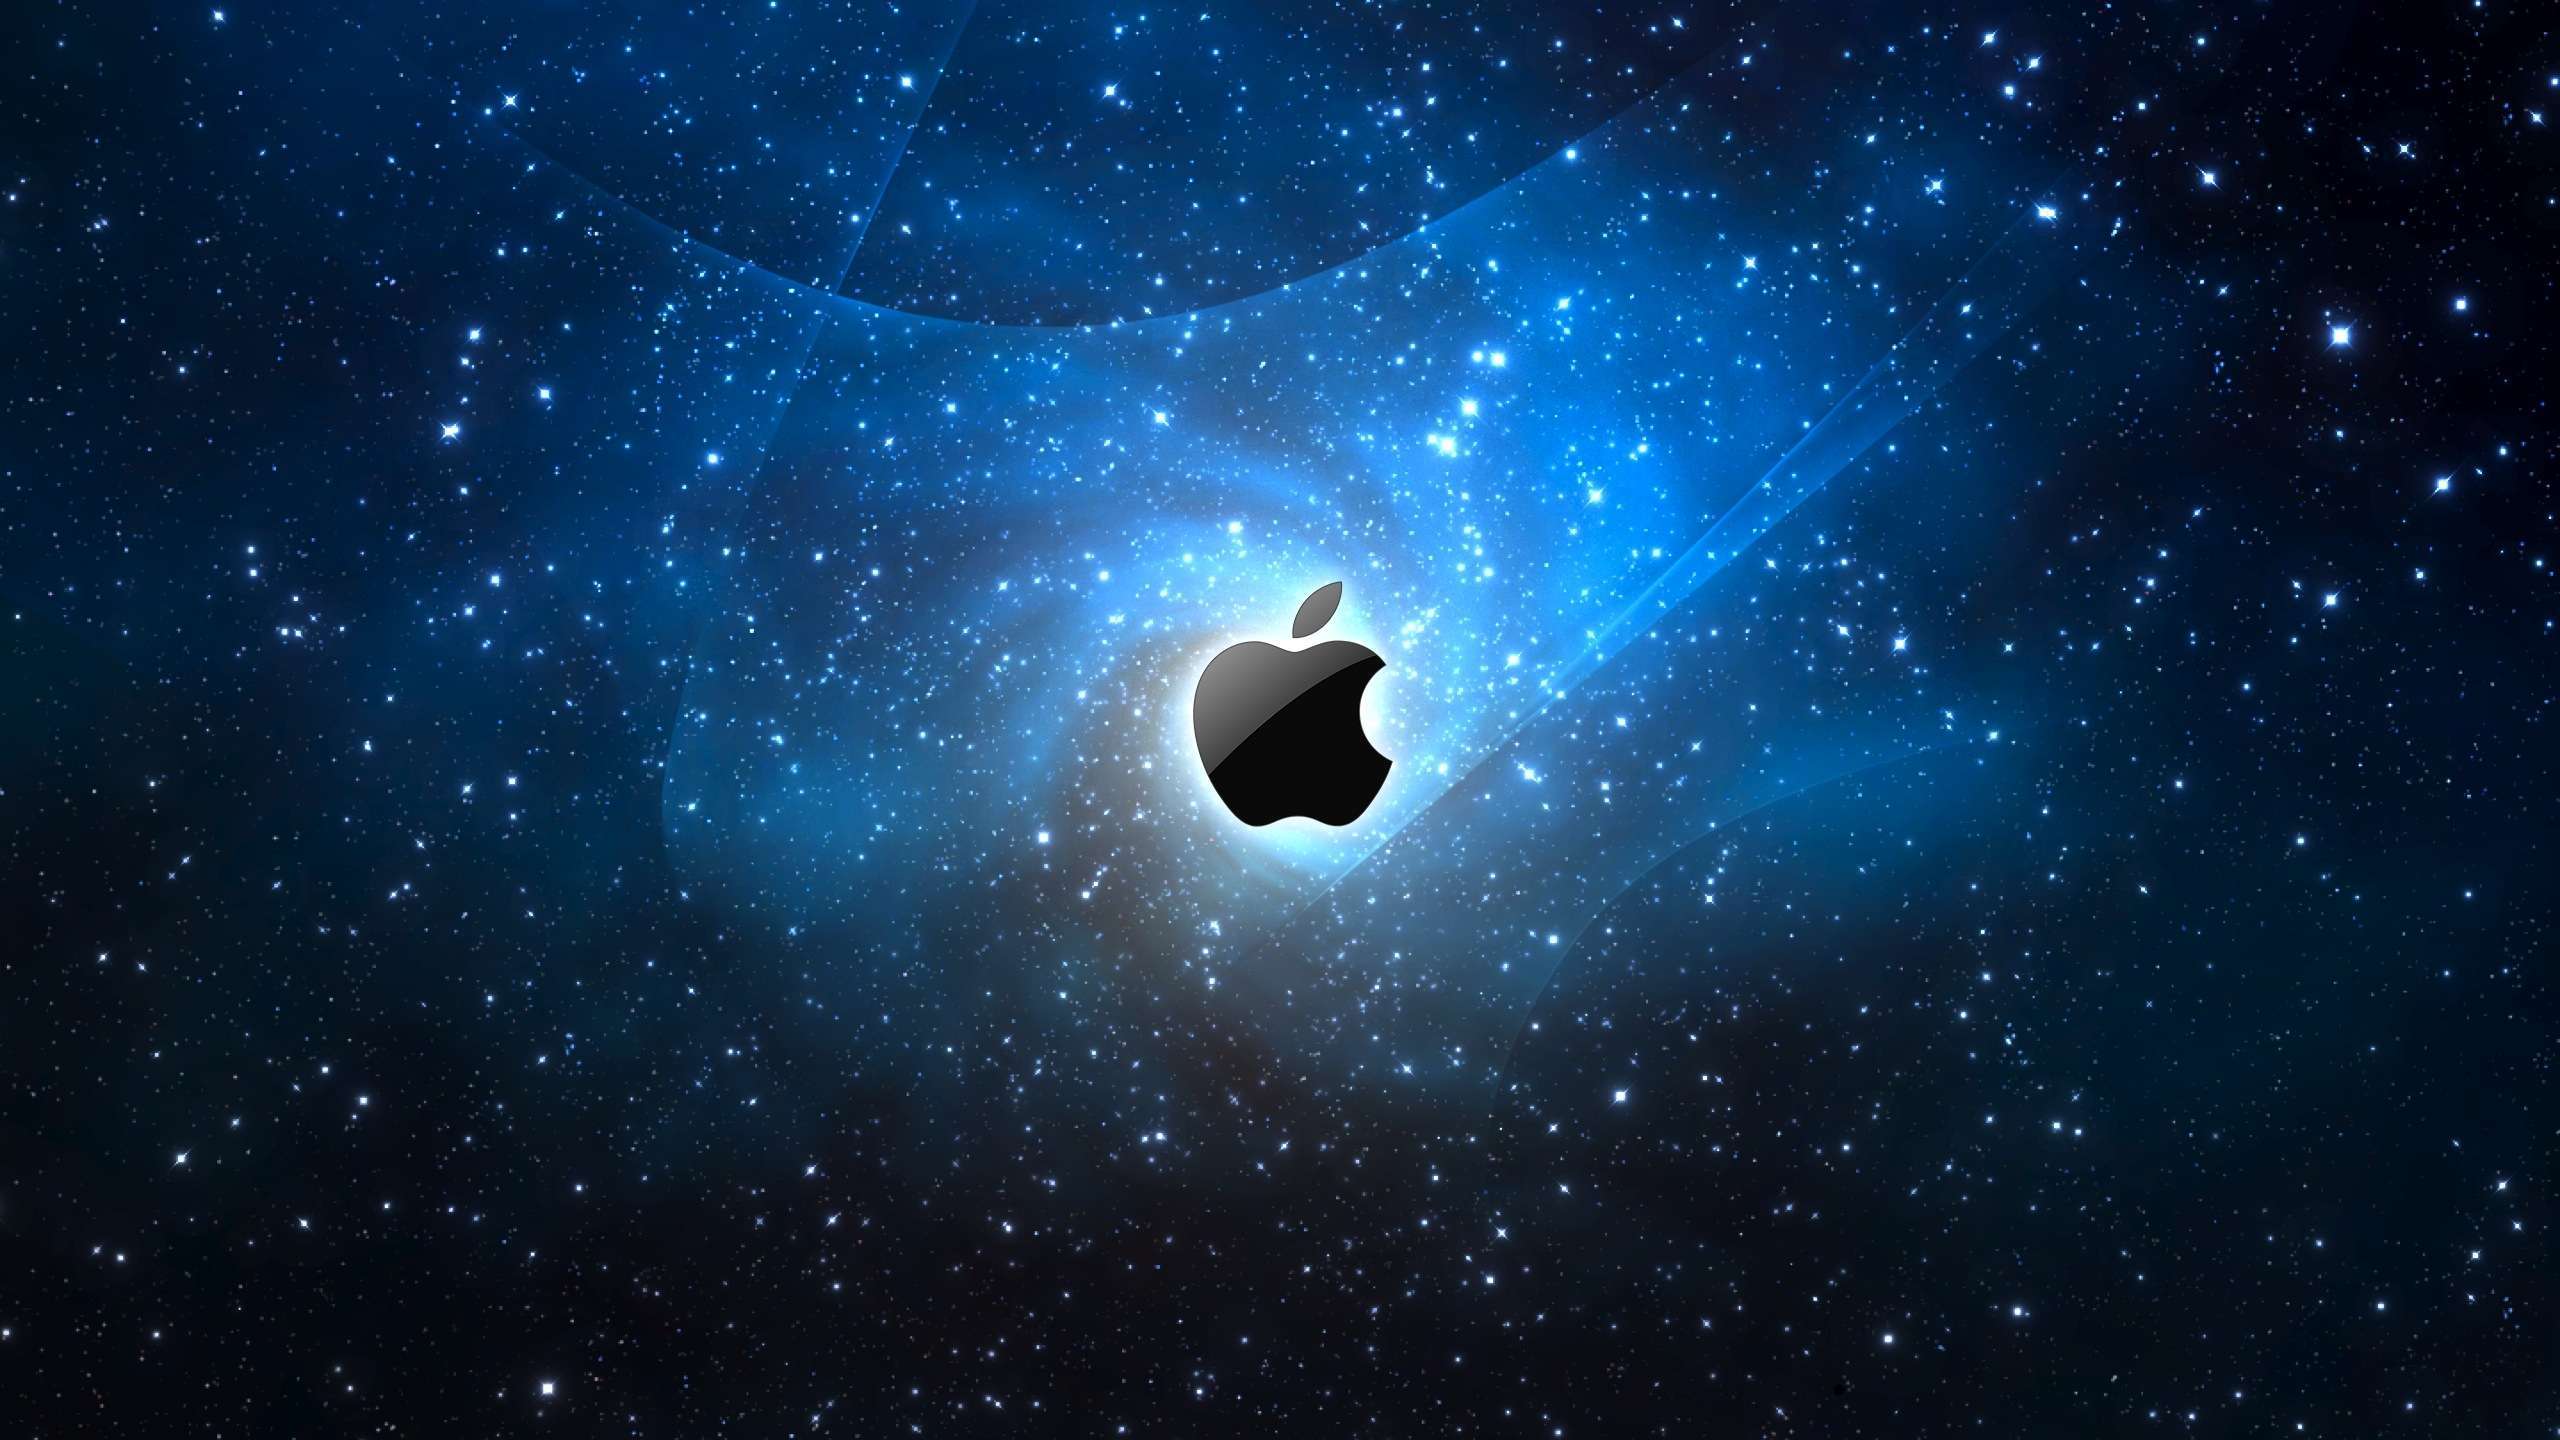 Interesting Imac Wallpapers 2560x1440PX ~ Imac Wallpapers